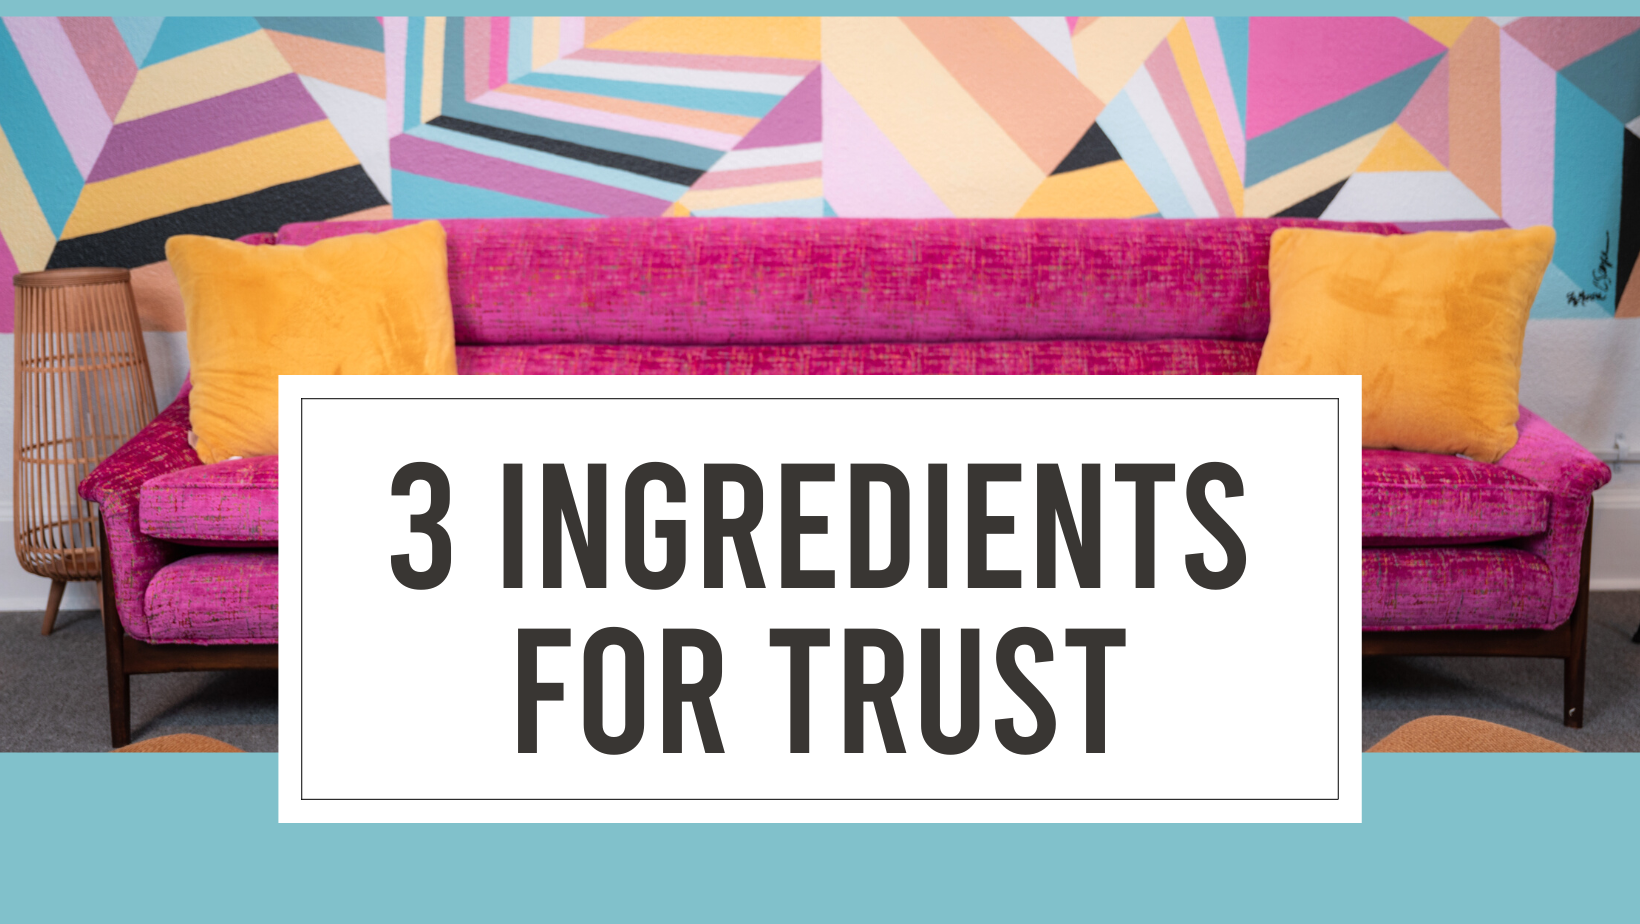 3 Ingredients for Trust